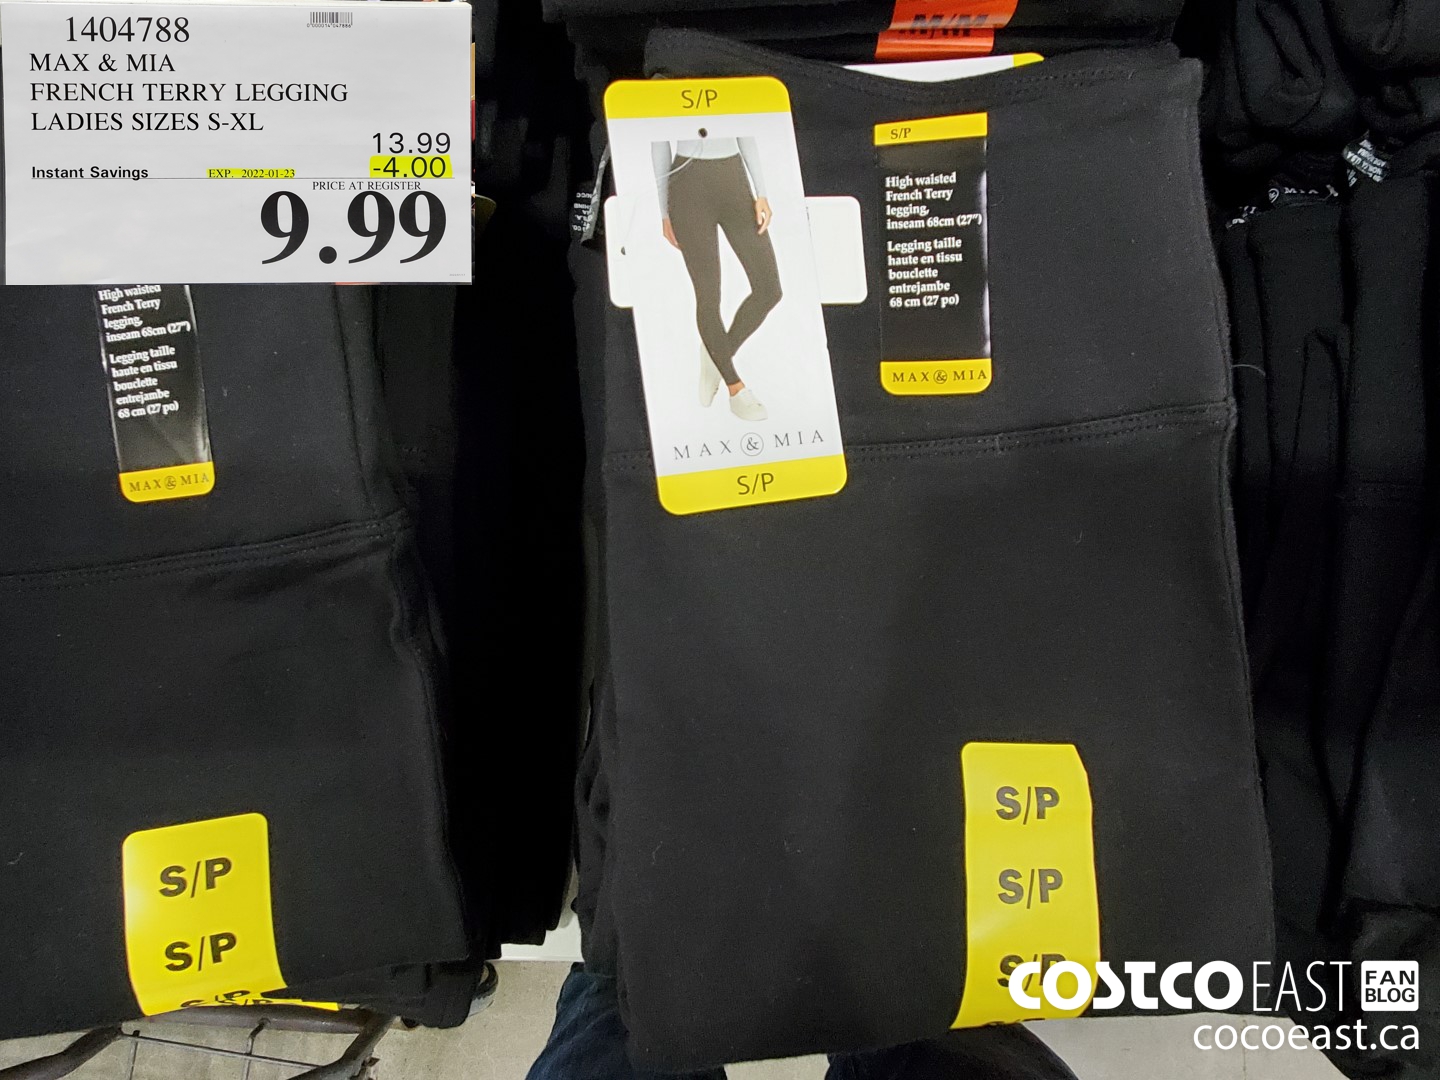 1404788 MAX MIA FRENCH TERRY LEGGING LADIES SIZES S XL 4 00 INSTANT SAVINGS  EXPIRES ON 2022 01 23 9 99 - Costco East Fan Blog